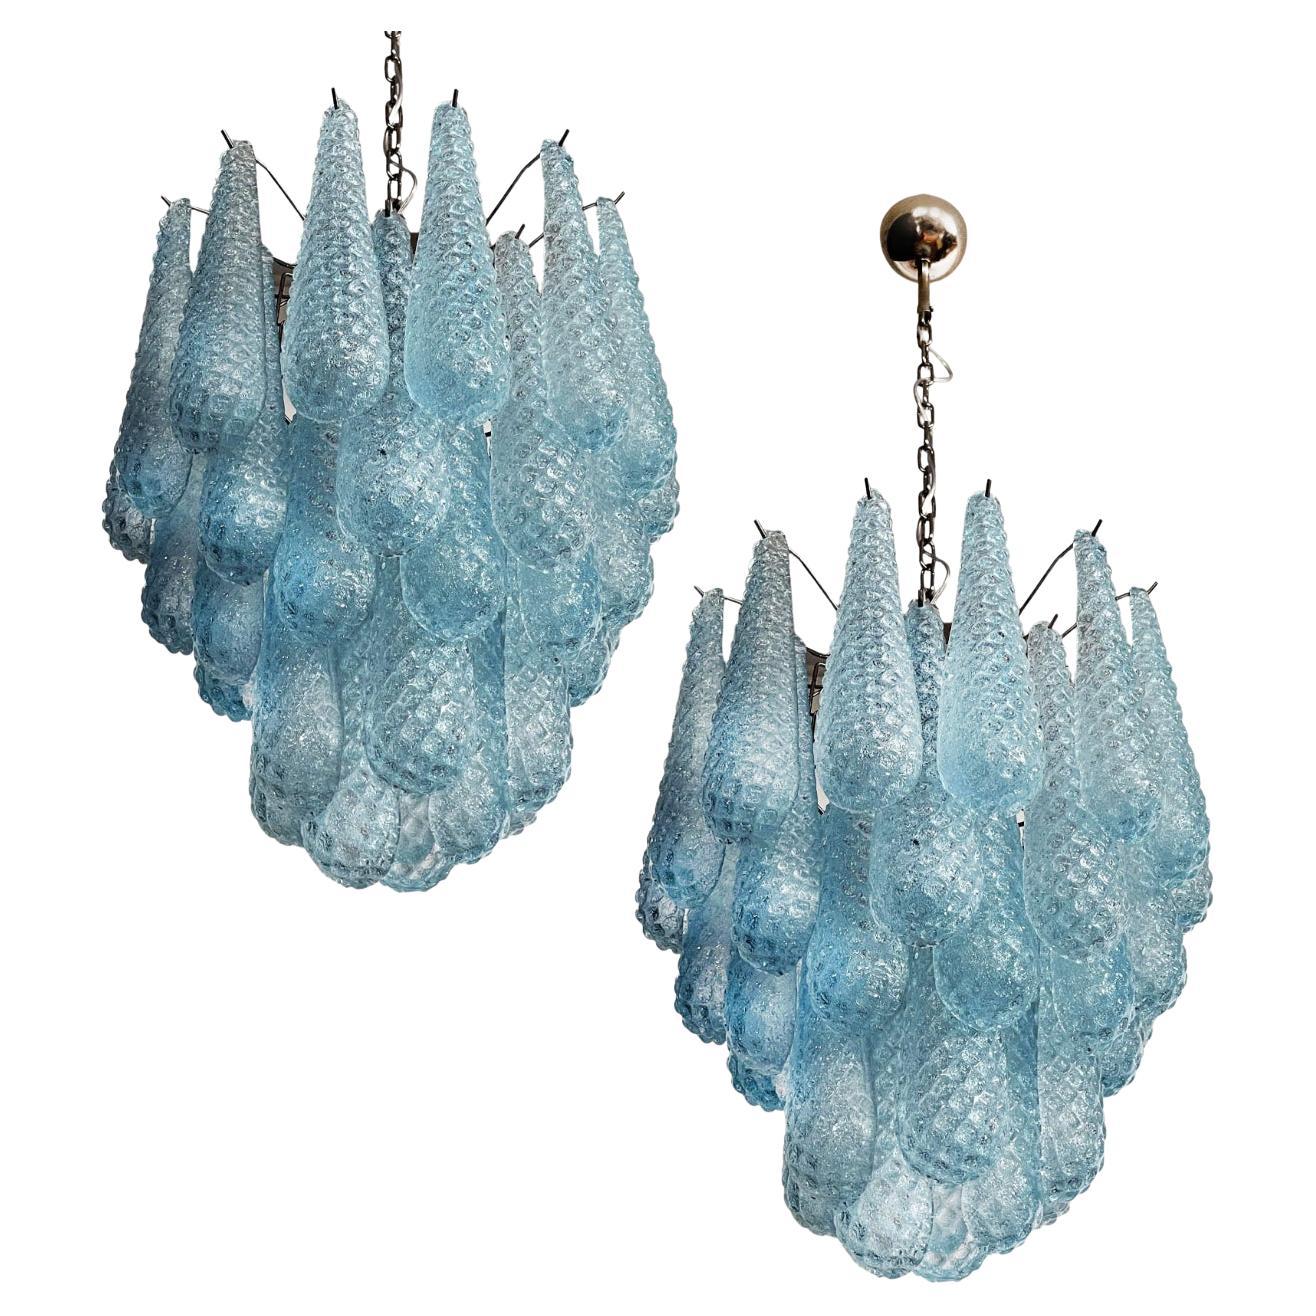 Fascinating Pair of Italian Murano Glass Chandeliers For Sale